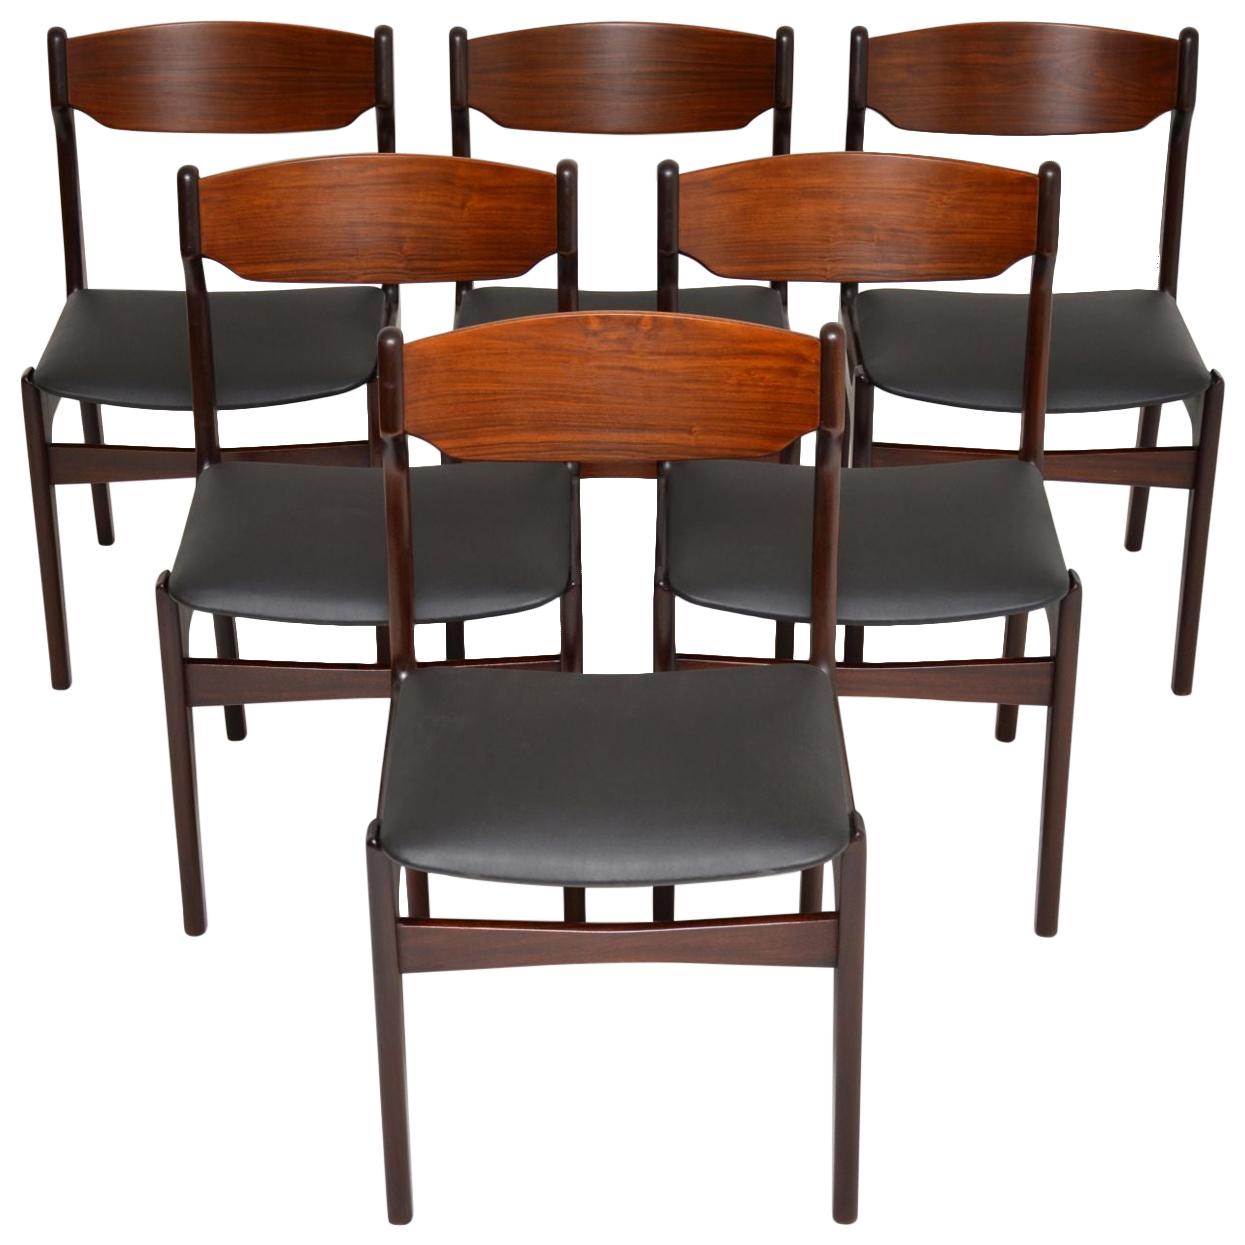 1960s Set of 6 Danish Dining Chairs